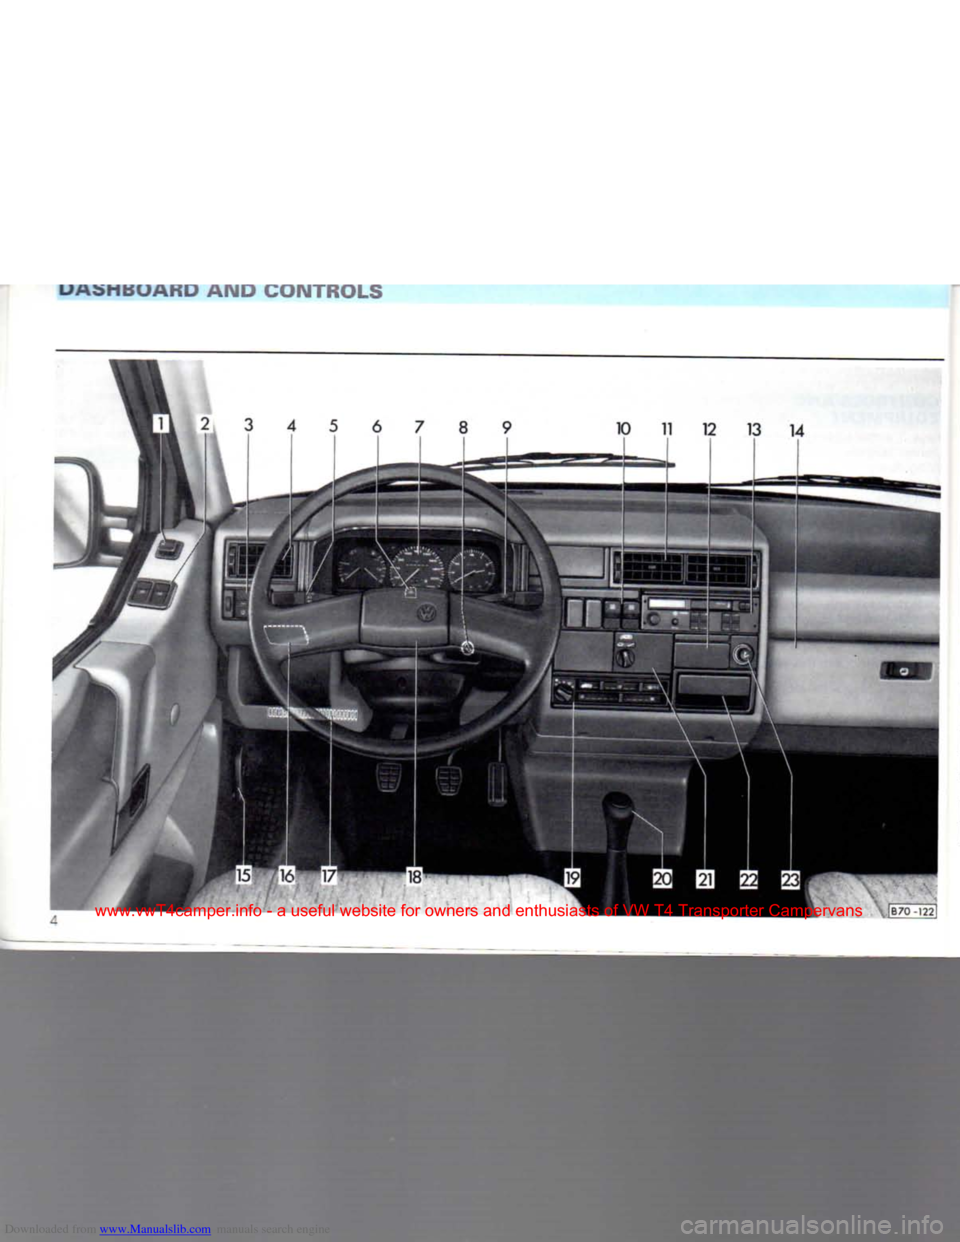 VOLKSWAGEN CARAVELLE 1992 T4 / 4.G Owners Manual Downloaded from www.Manualslib.com manuals search engine 
LI
 Aon
 BOARD AND CONTROLS 
www.vwT4camper.info  - a  useful  website  for owners  and enthusiasts  of VW  T4 Transporter  Campervans   